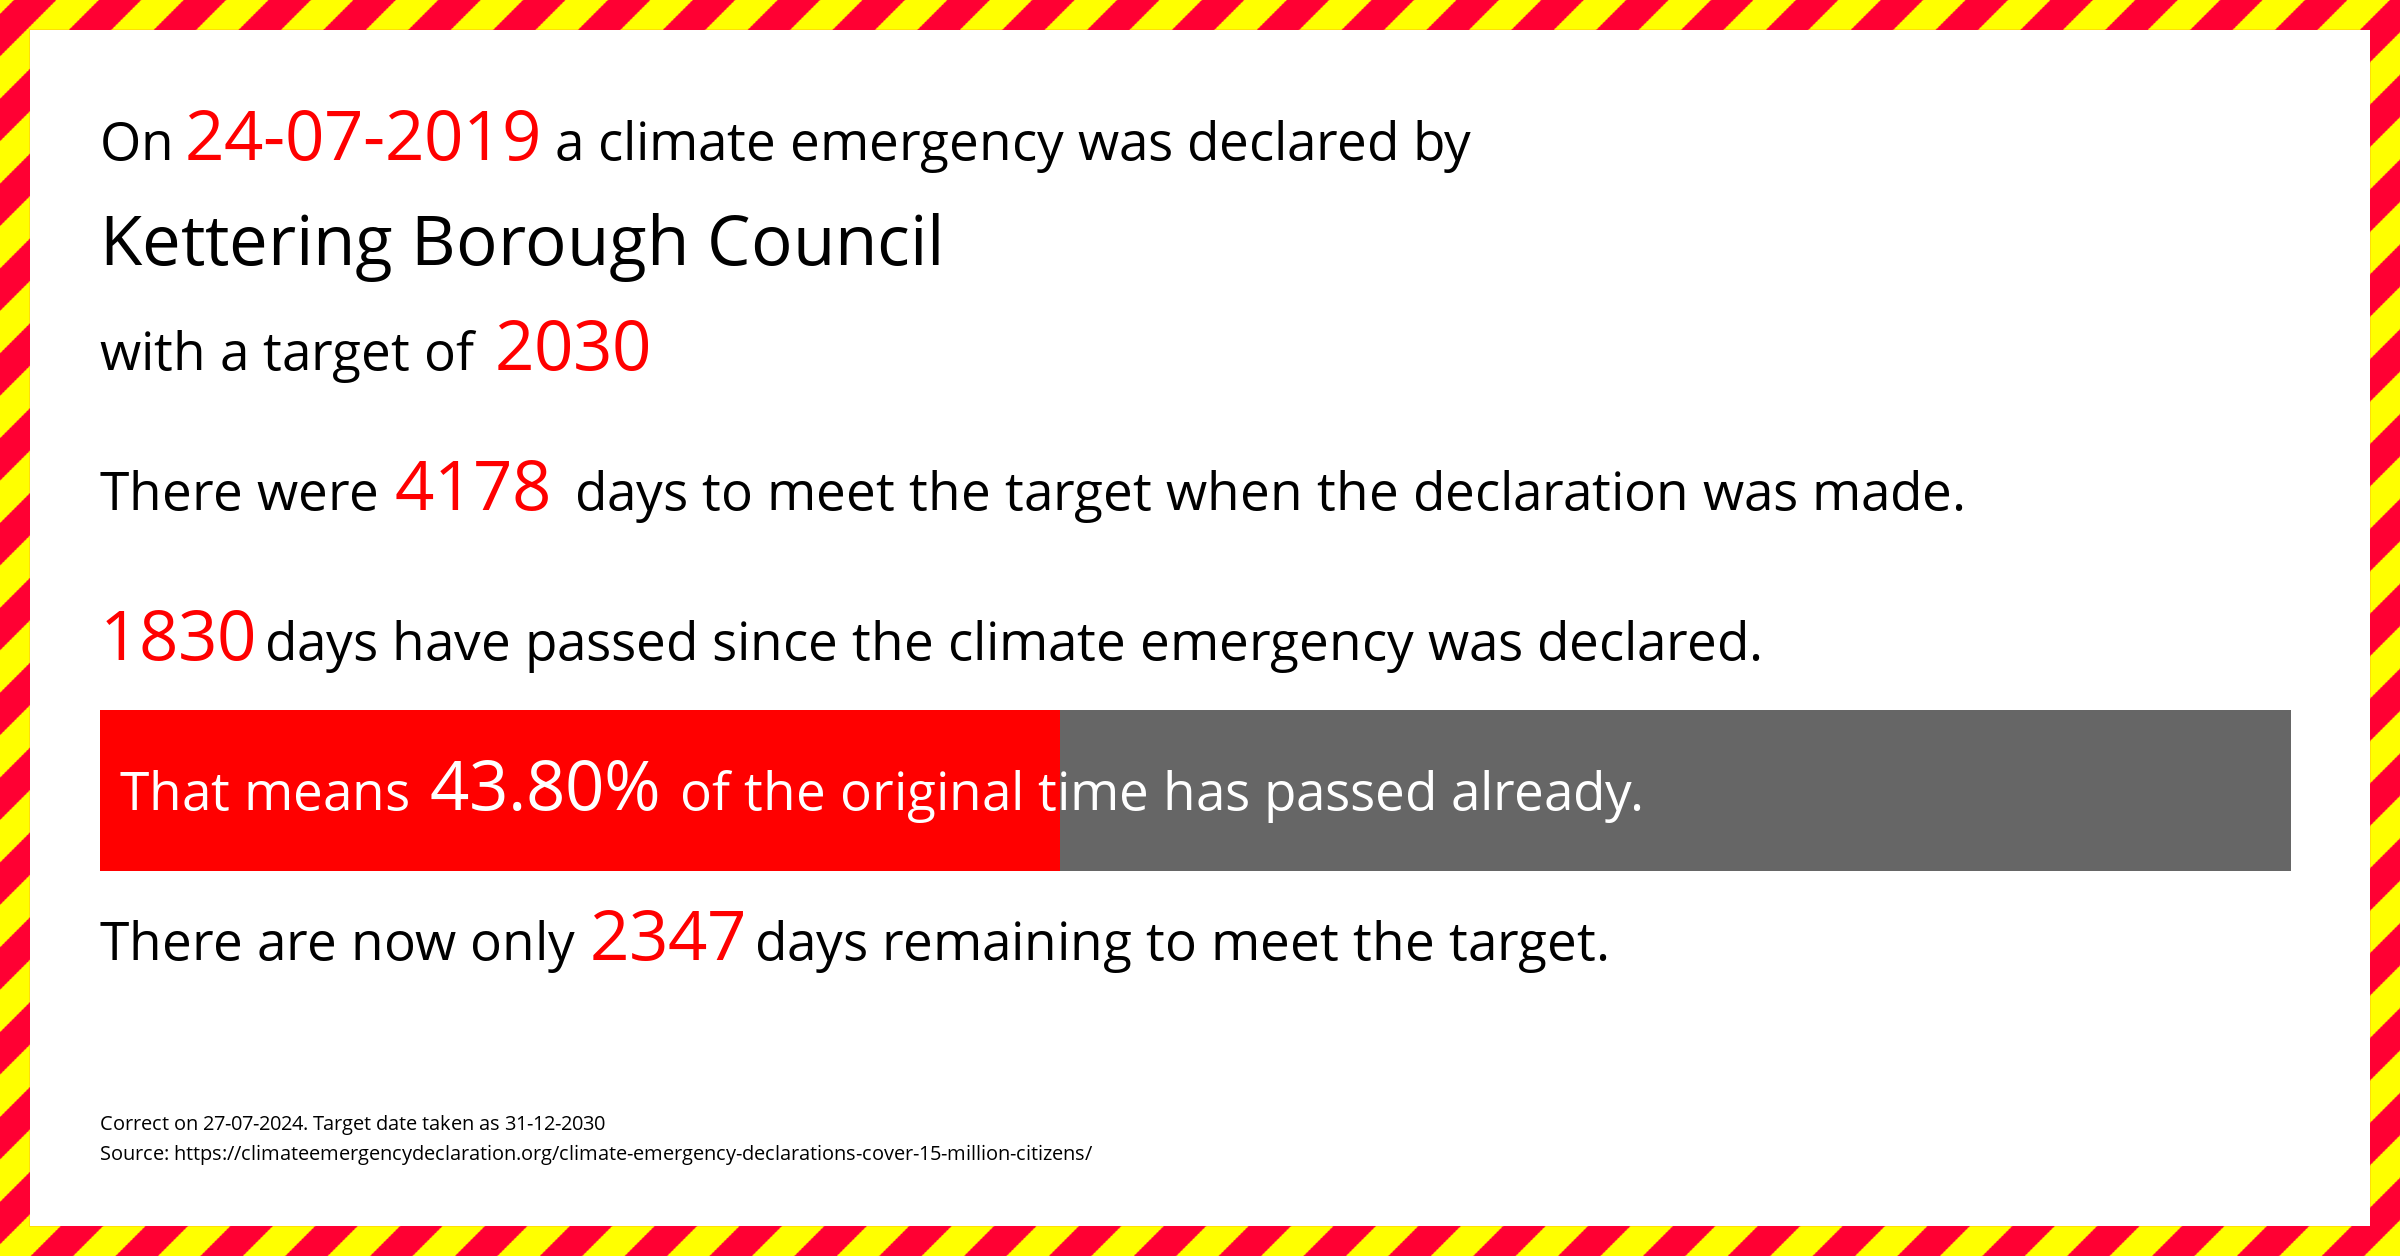 Kettering Borough Council declared a Climate emergency on Wednesday 24th July 2019, with a target of 2030.